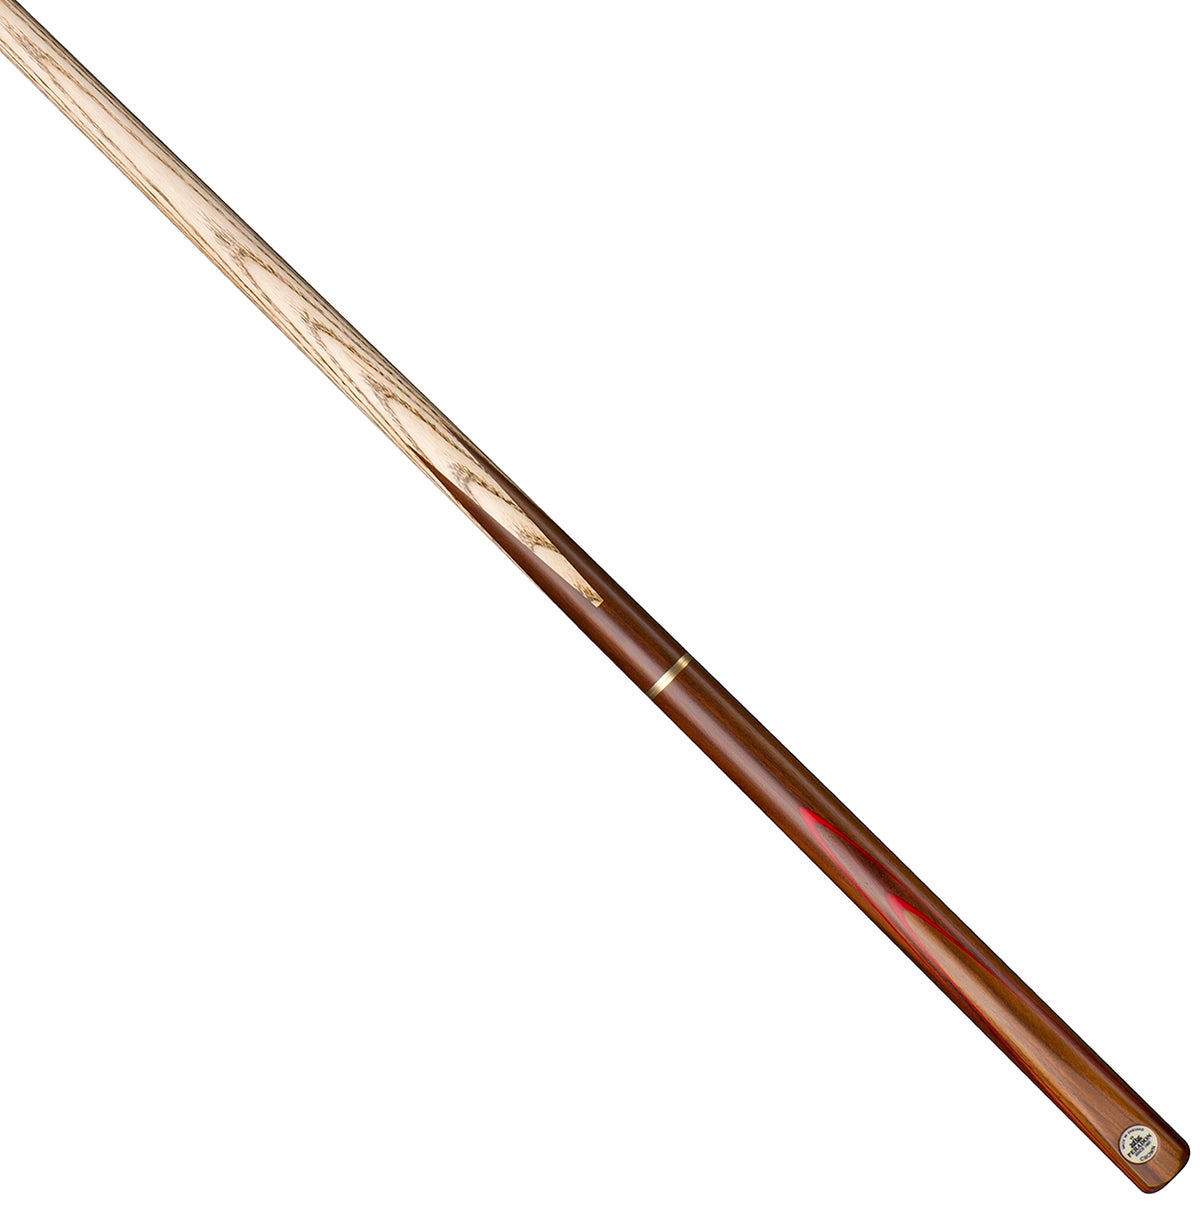 Peradon Crown 3/4 Jointed Snooker Cue. On angle view